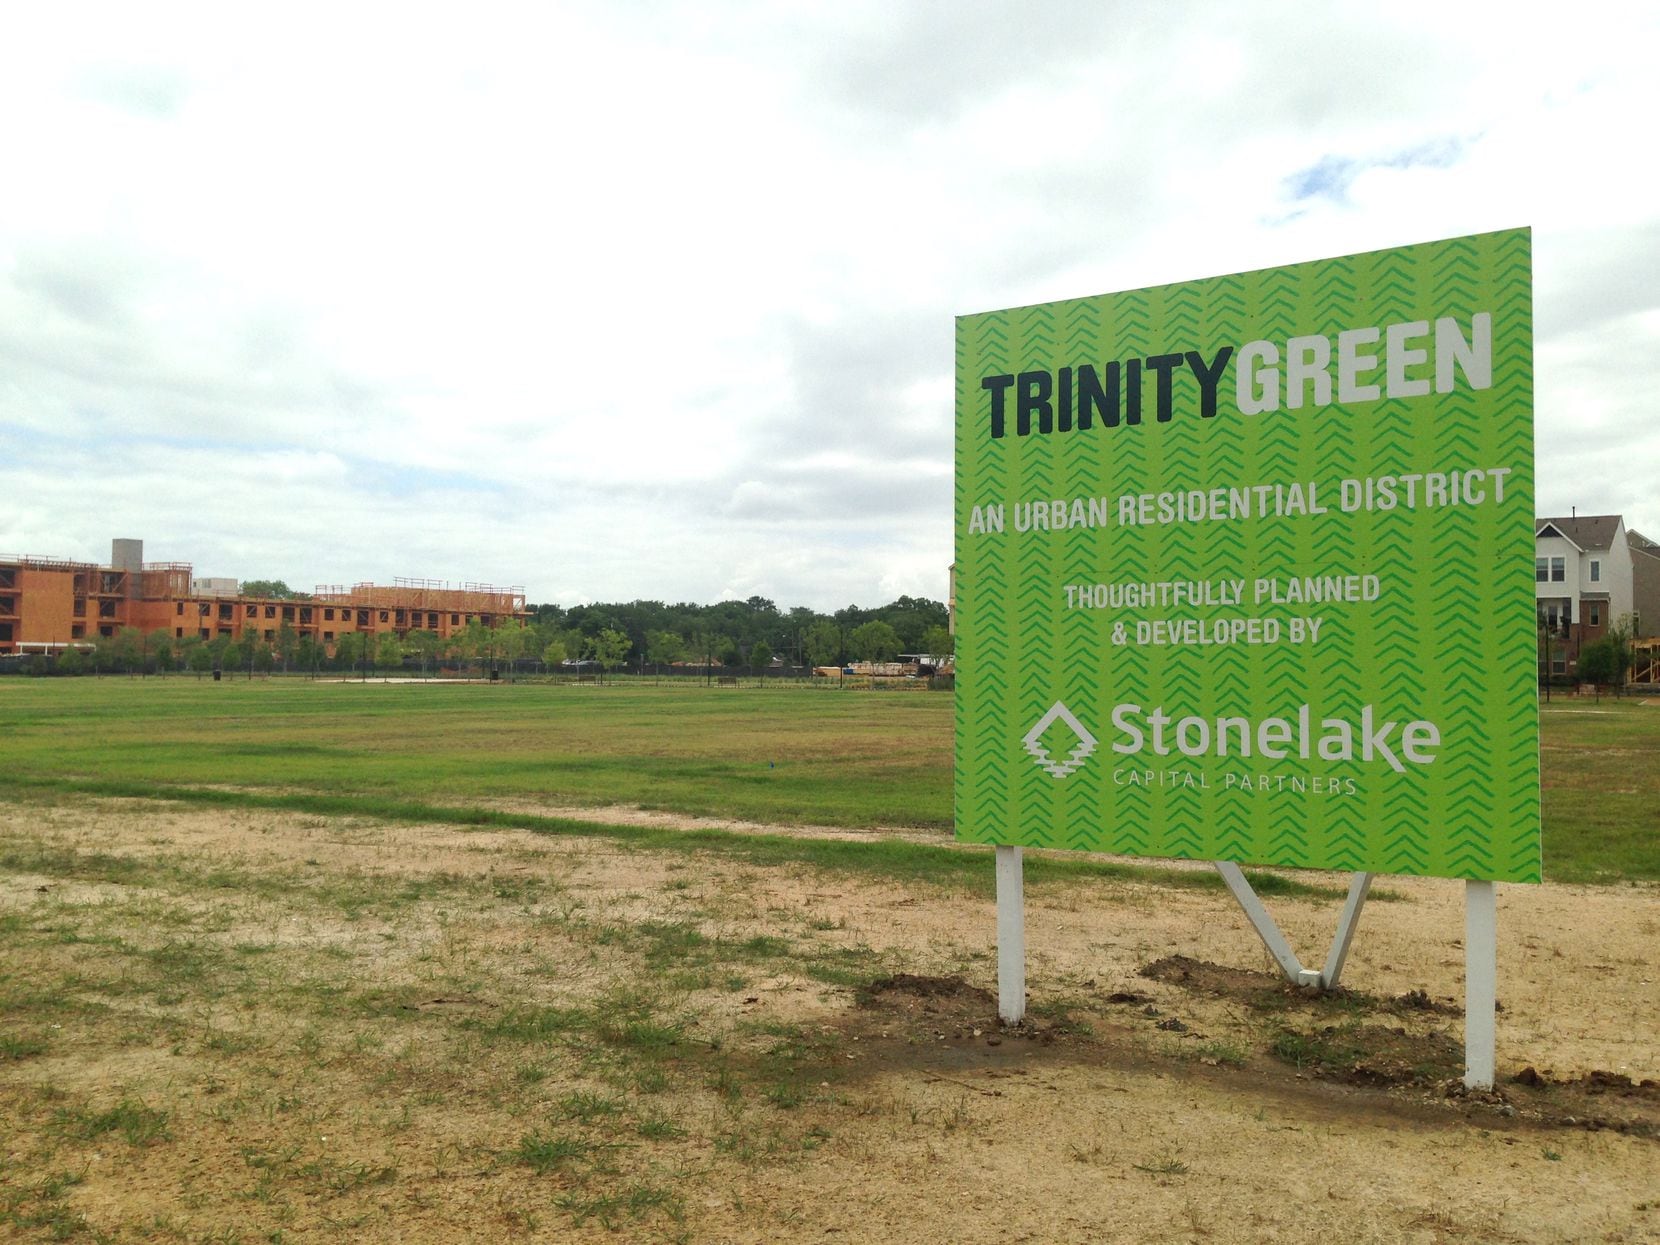 The 25-acre Trinity Green project in West Dallas includes homes and apartments.